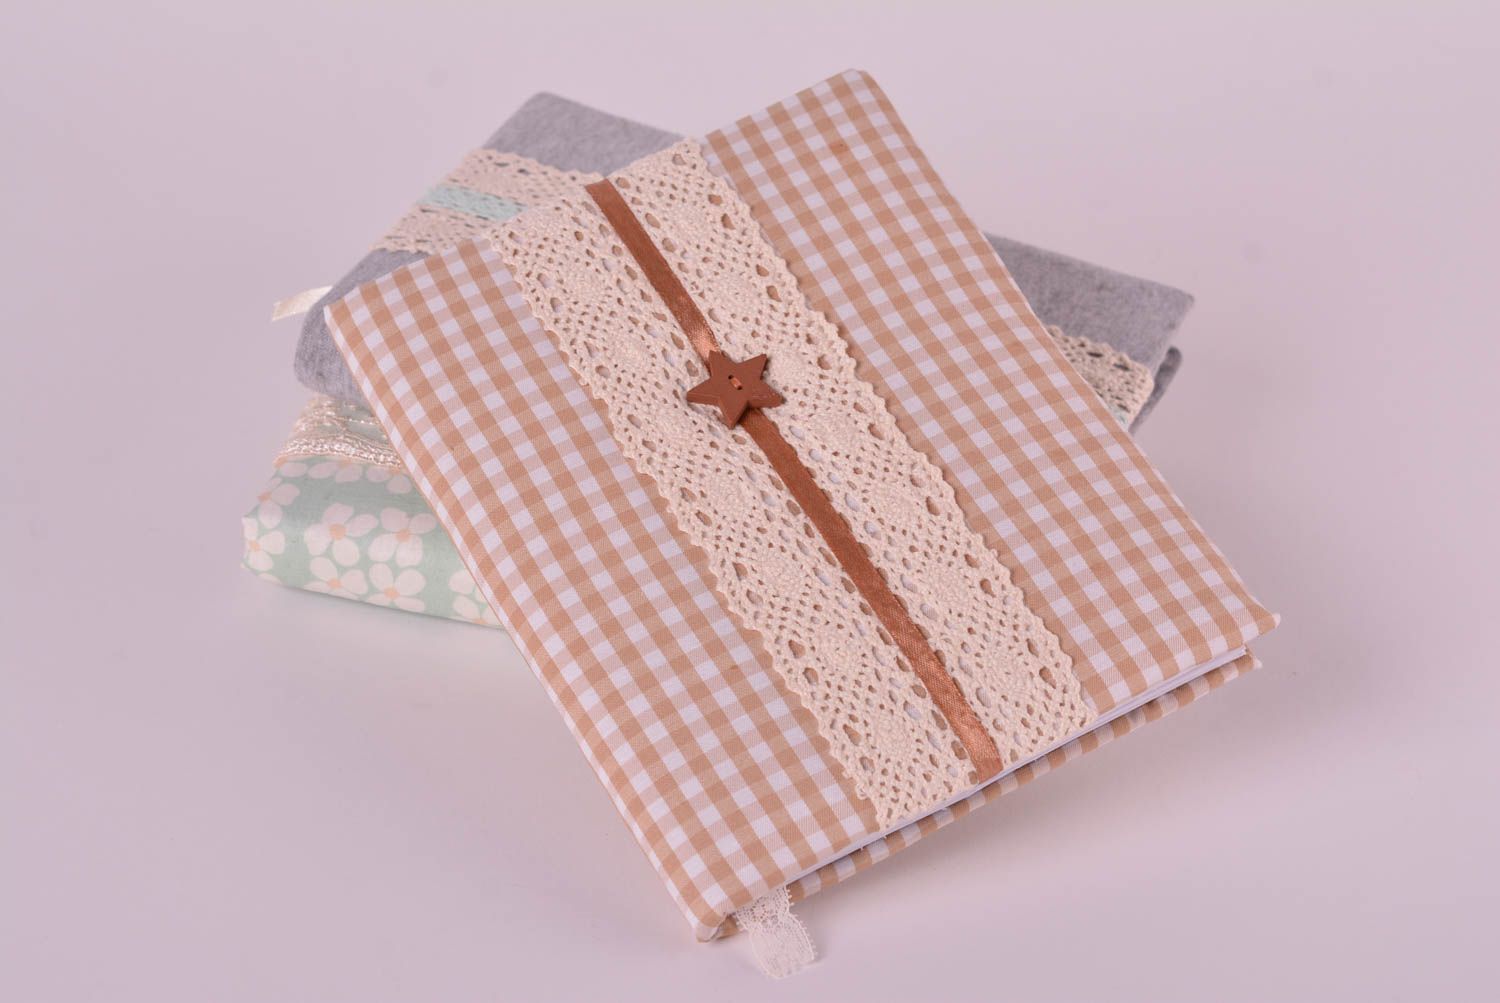 Handmade notebook handmade sketchbook checkered notepad with lace cover photo 1